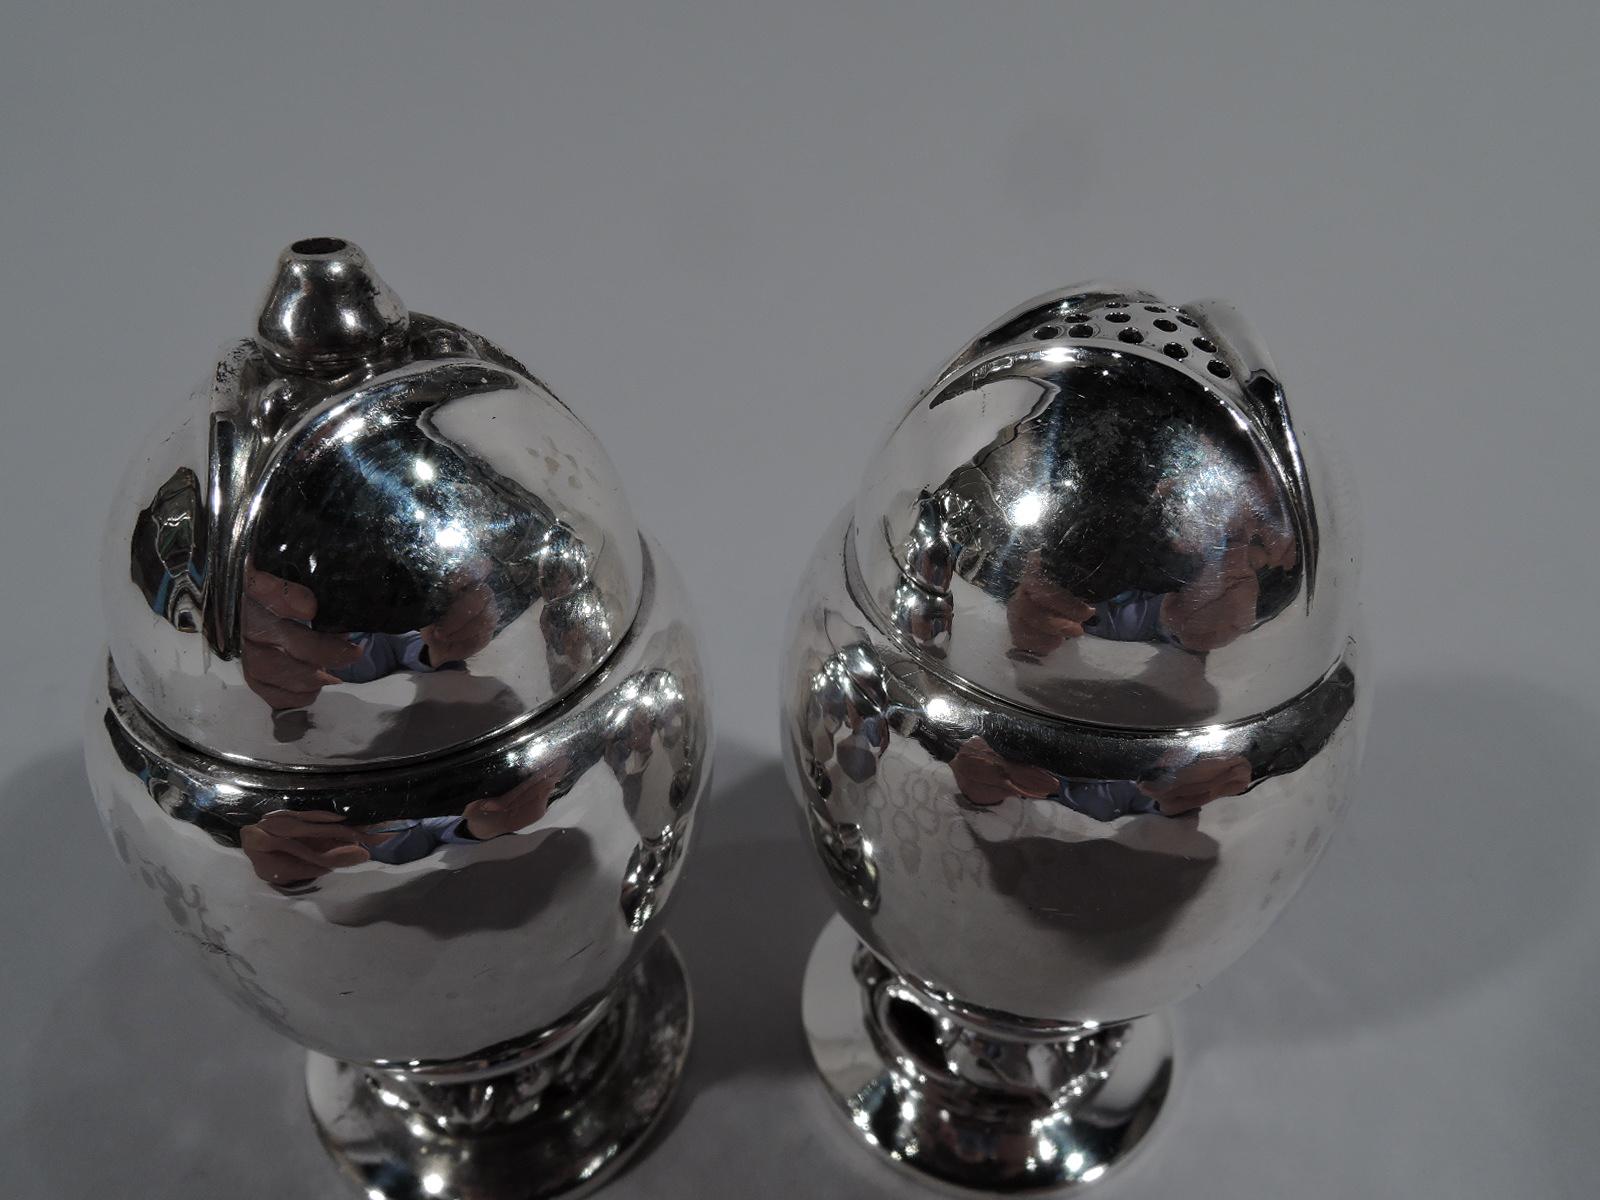 Pair of blossom sterling silver salt and pepper shakers. Made by Georg Jensen in Copenhagen. Each, ovoid on stem with openwork seeded-pod rniceaux mounted to flat and circular foot. Cover comprises 3 leaves with triangular center. One shaker has